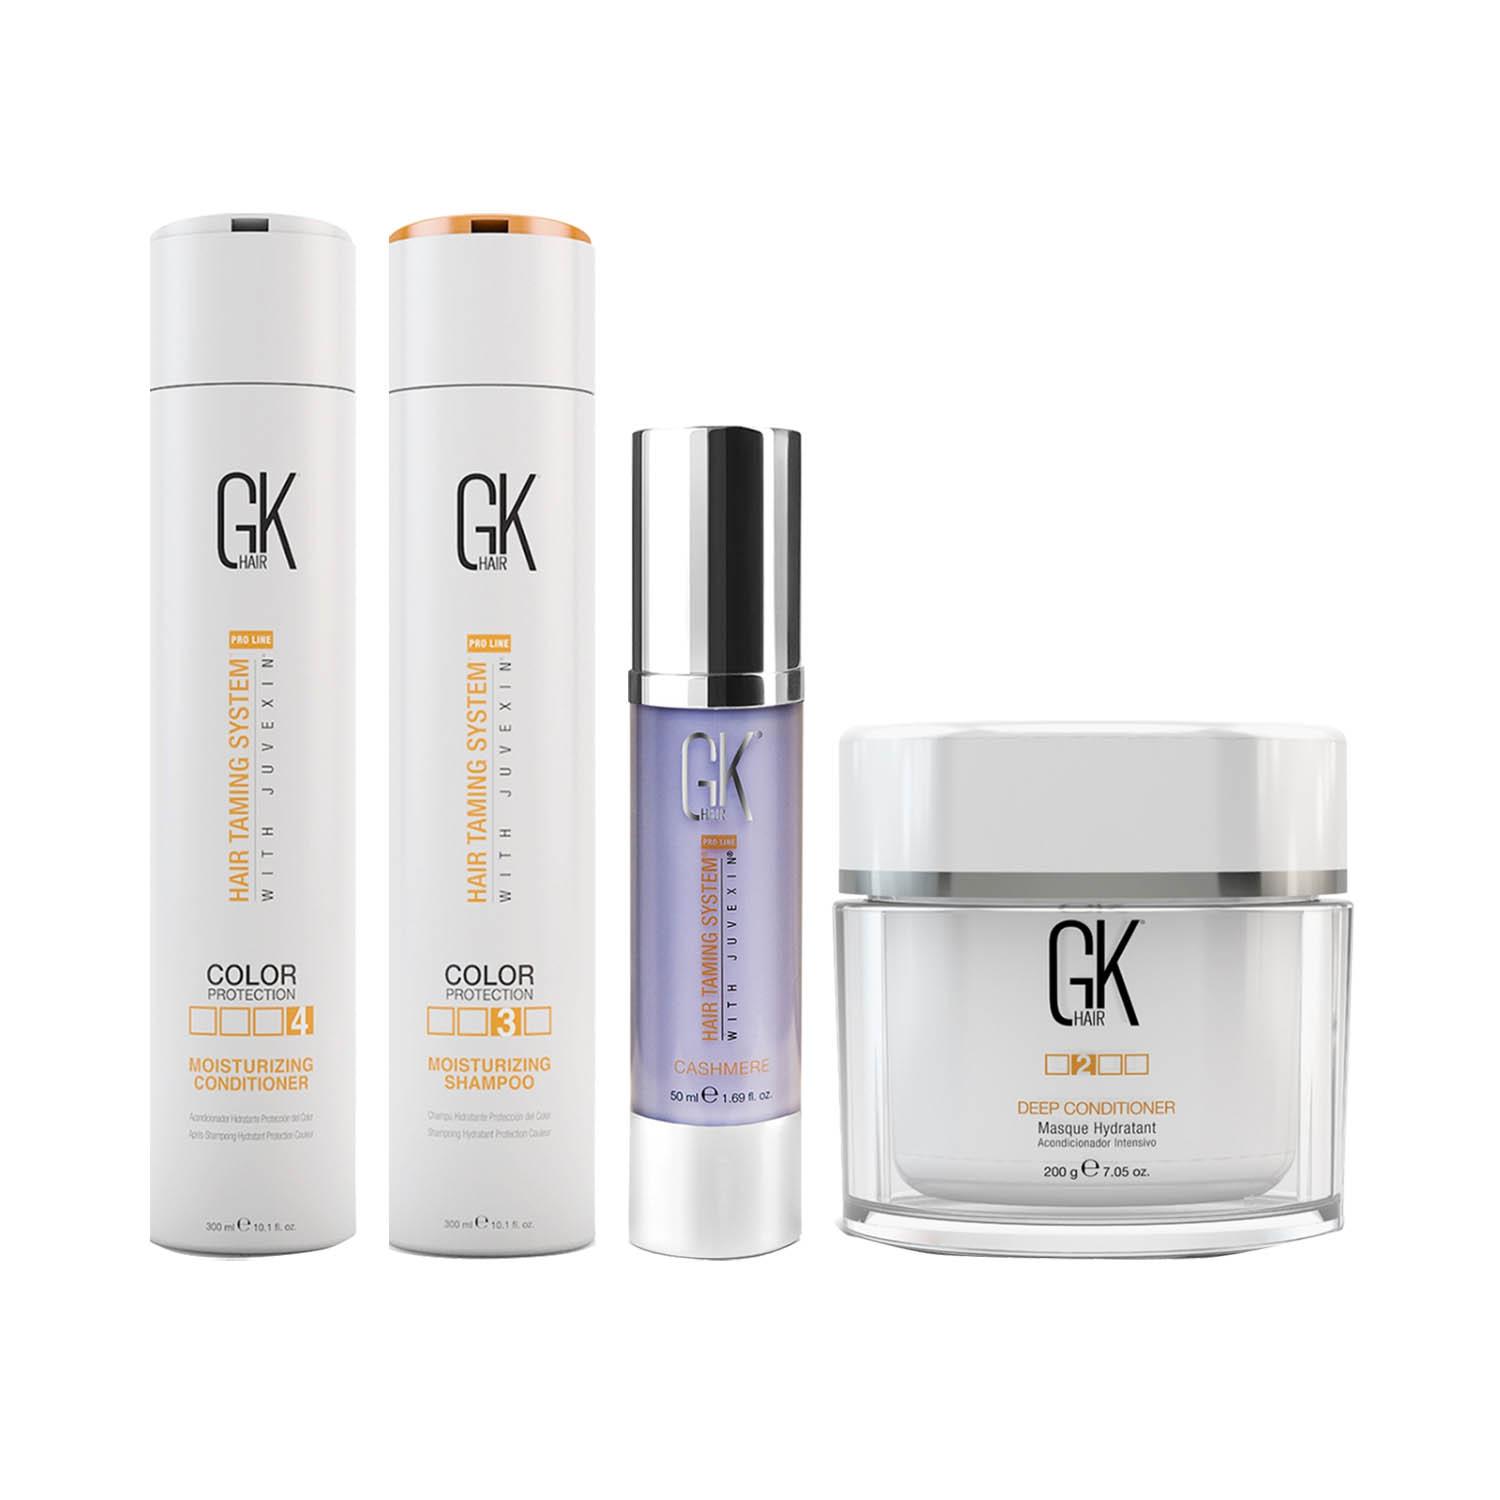 GK Hair | GK Hair Moisturizing Shampoo and Conditioner (300ml),Cashmere (50ml),Deep Conditioner Masque Combo